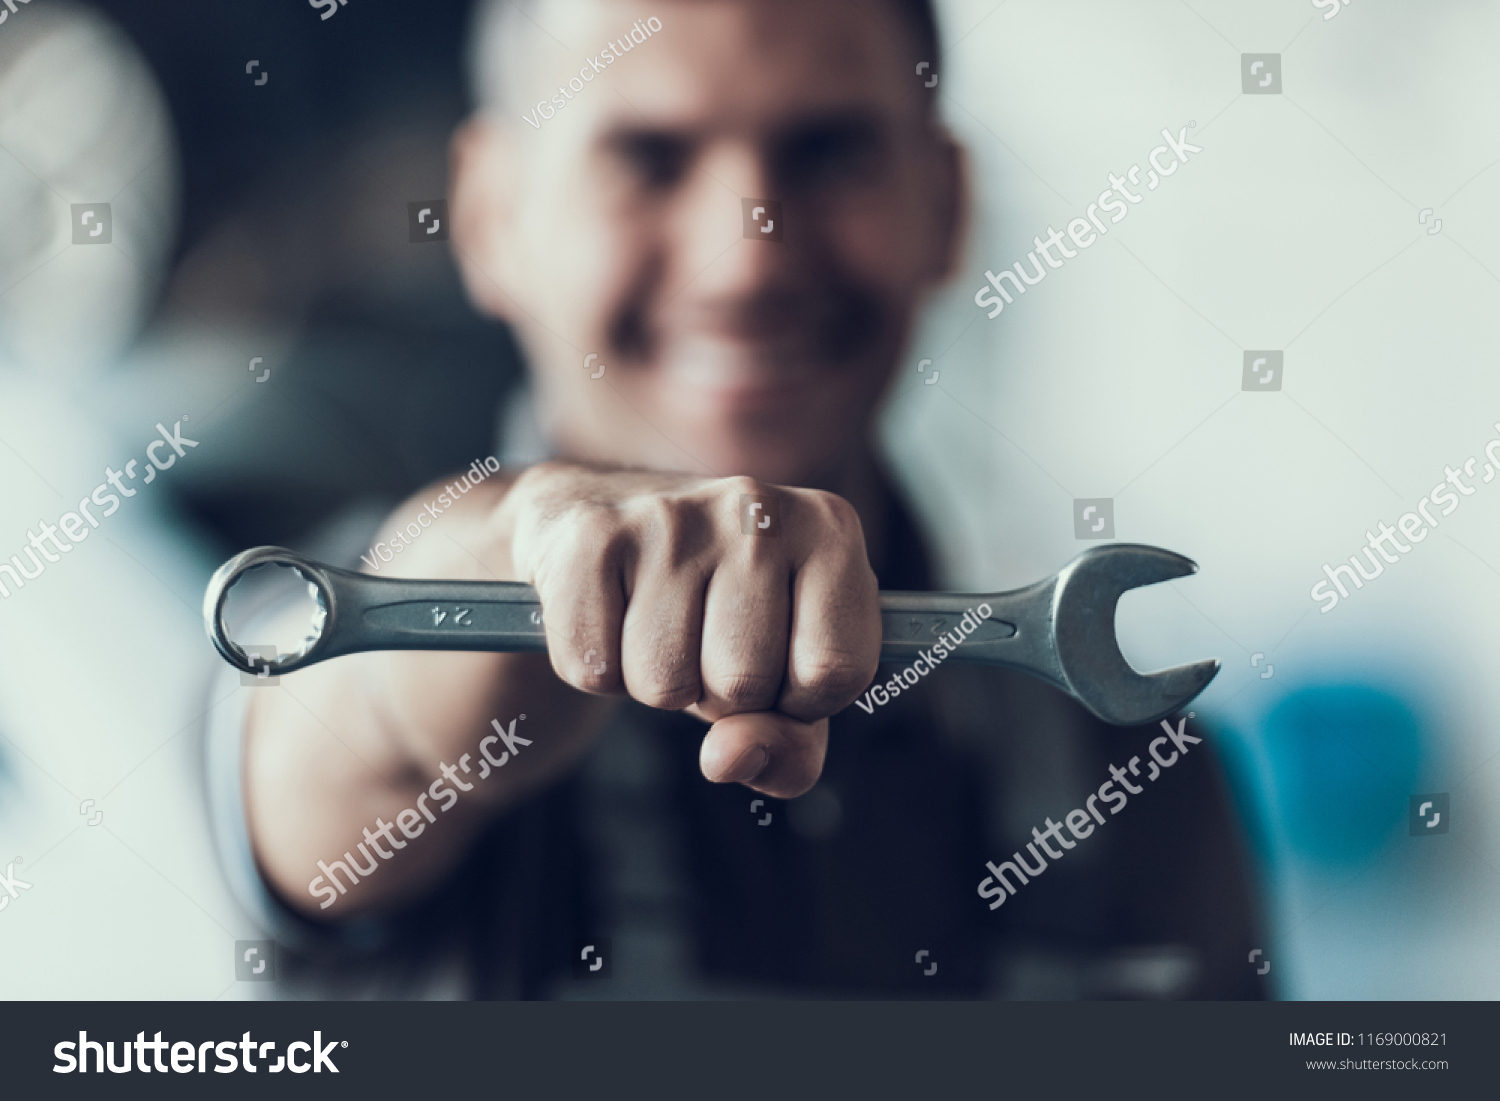 Auto Mechanic with Tool on Blurred Background. Close-up of Repairman Strong Fist Holding Metalic Wrench in Garage. Automobile Repair Service Concept. Automobile Master Concept #1169000821